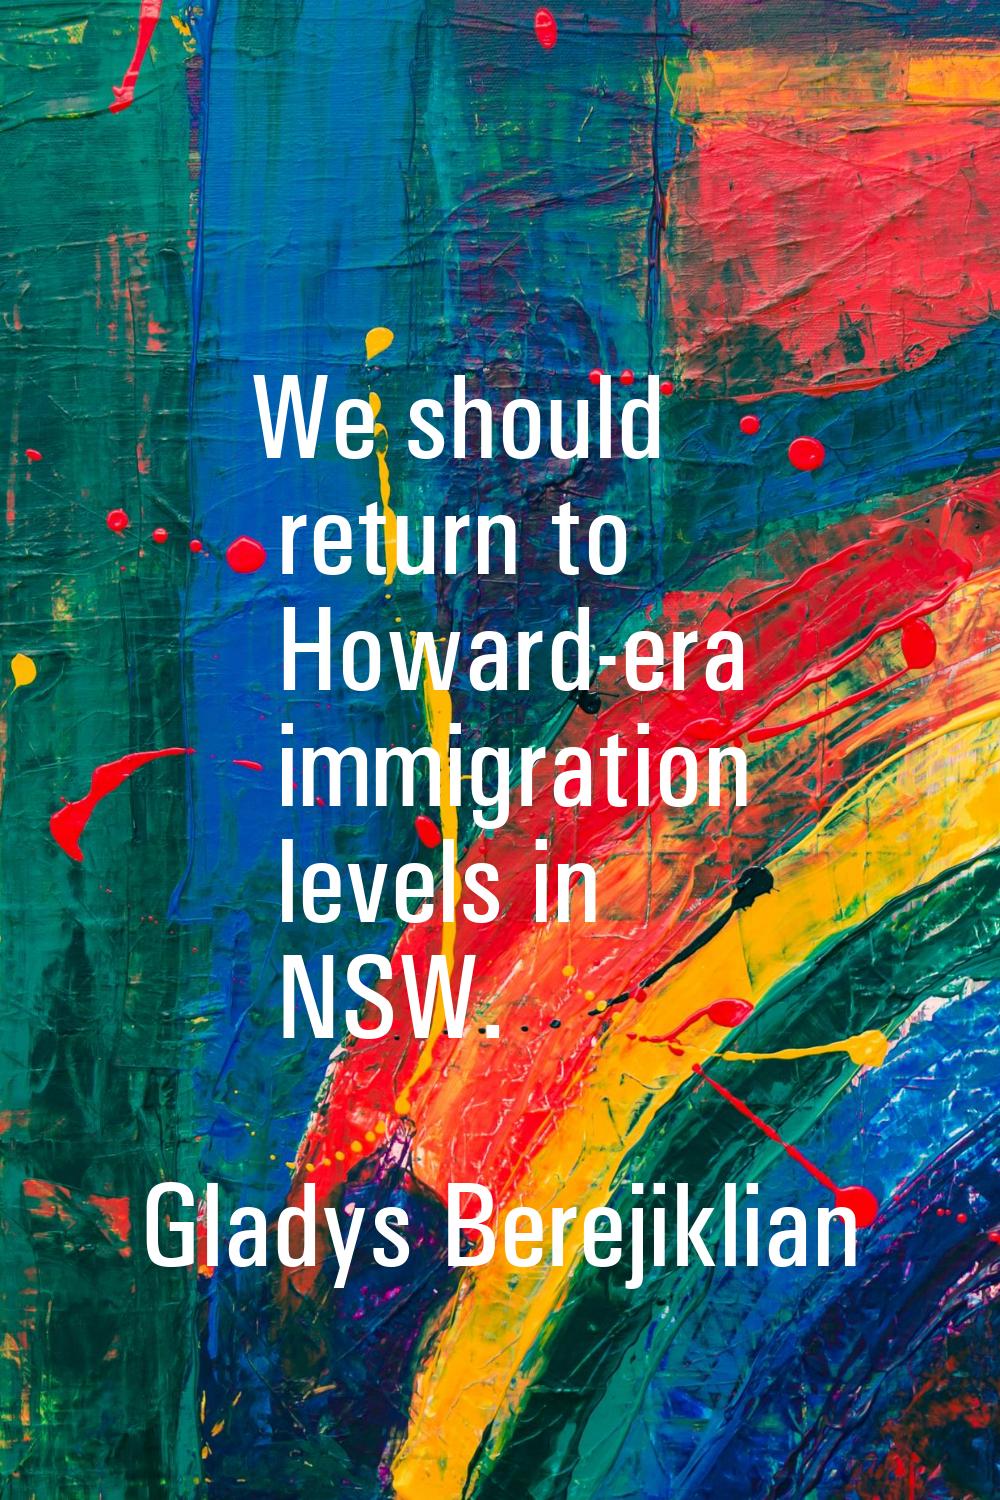 We should return to Howard-era immigration levels in NSW.